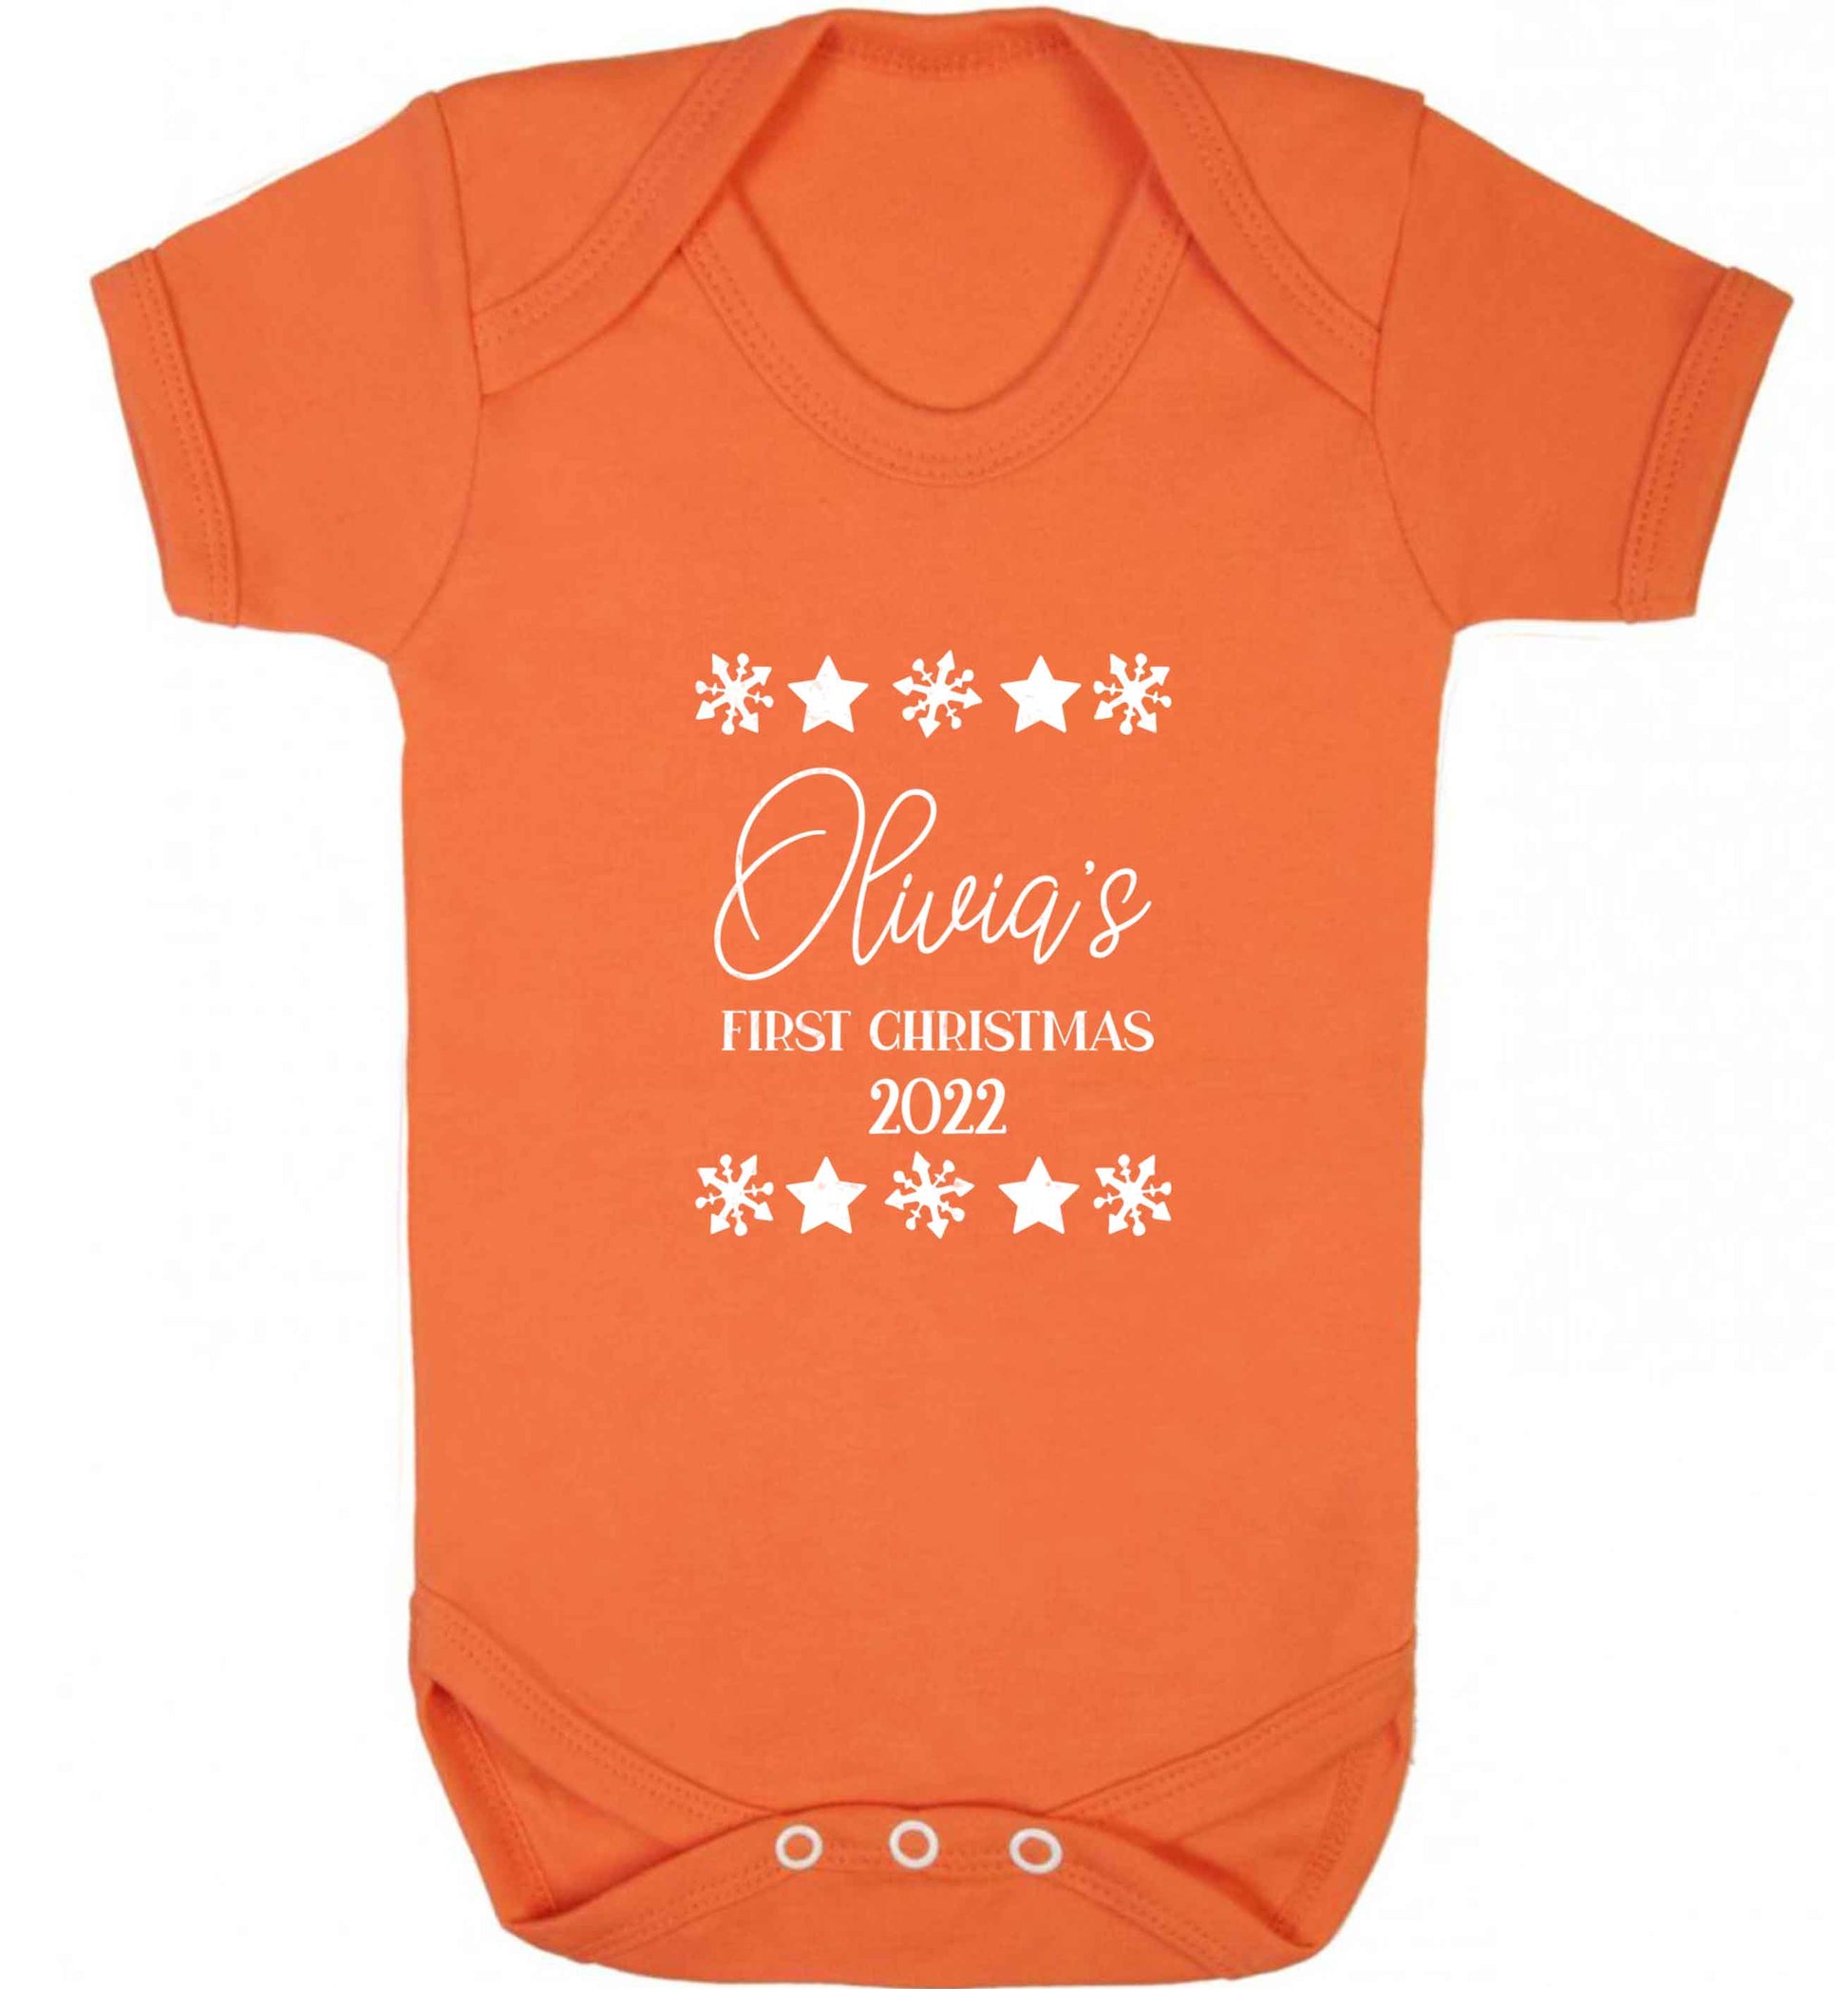 Personalised First Christmas baby vest orange 18-24 months